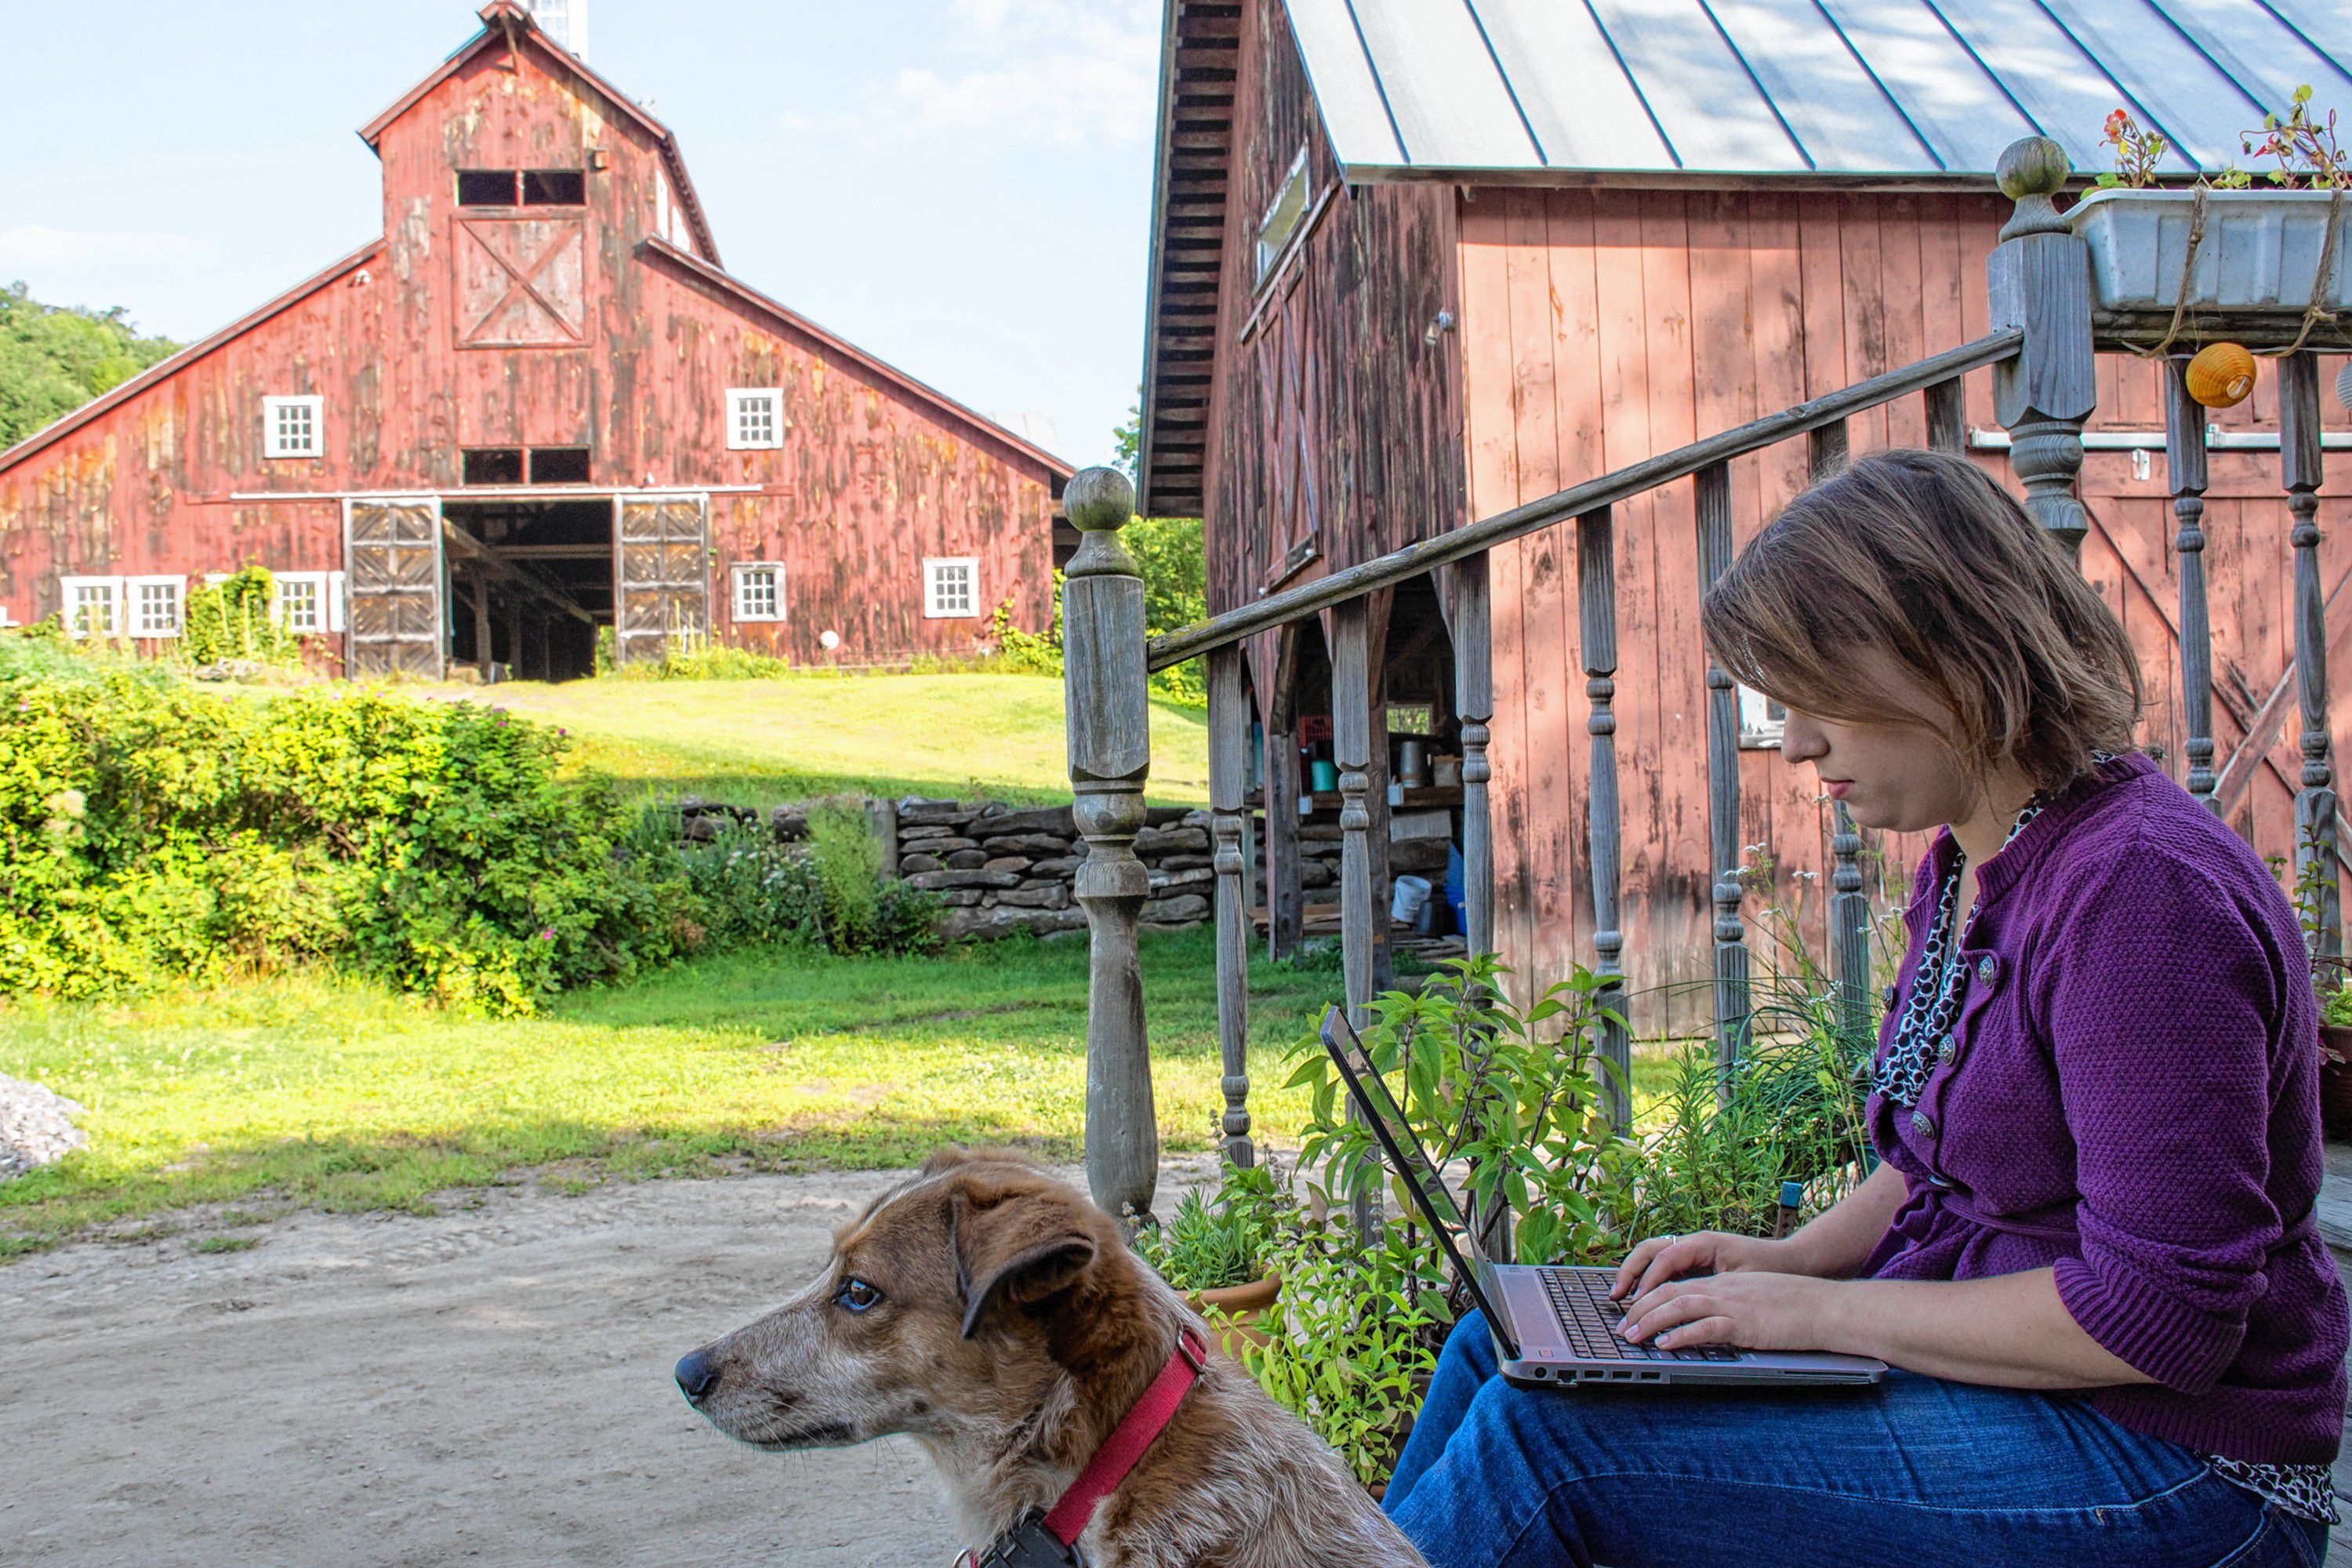 Sarah Danly, network manager for Vermont's Farm to Plate food system plan, works from her "home office" -- the steps of her rented house on a farm in Royalton, Vt.., as her officemate, Else the dog, keeps watch. (Nancy Nutile-McMenemy photograph)